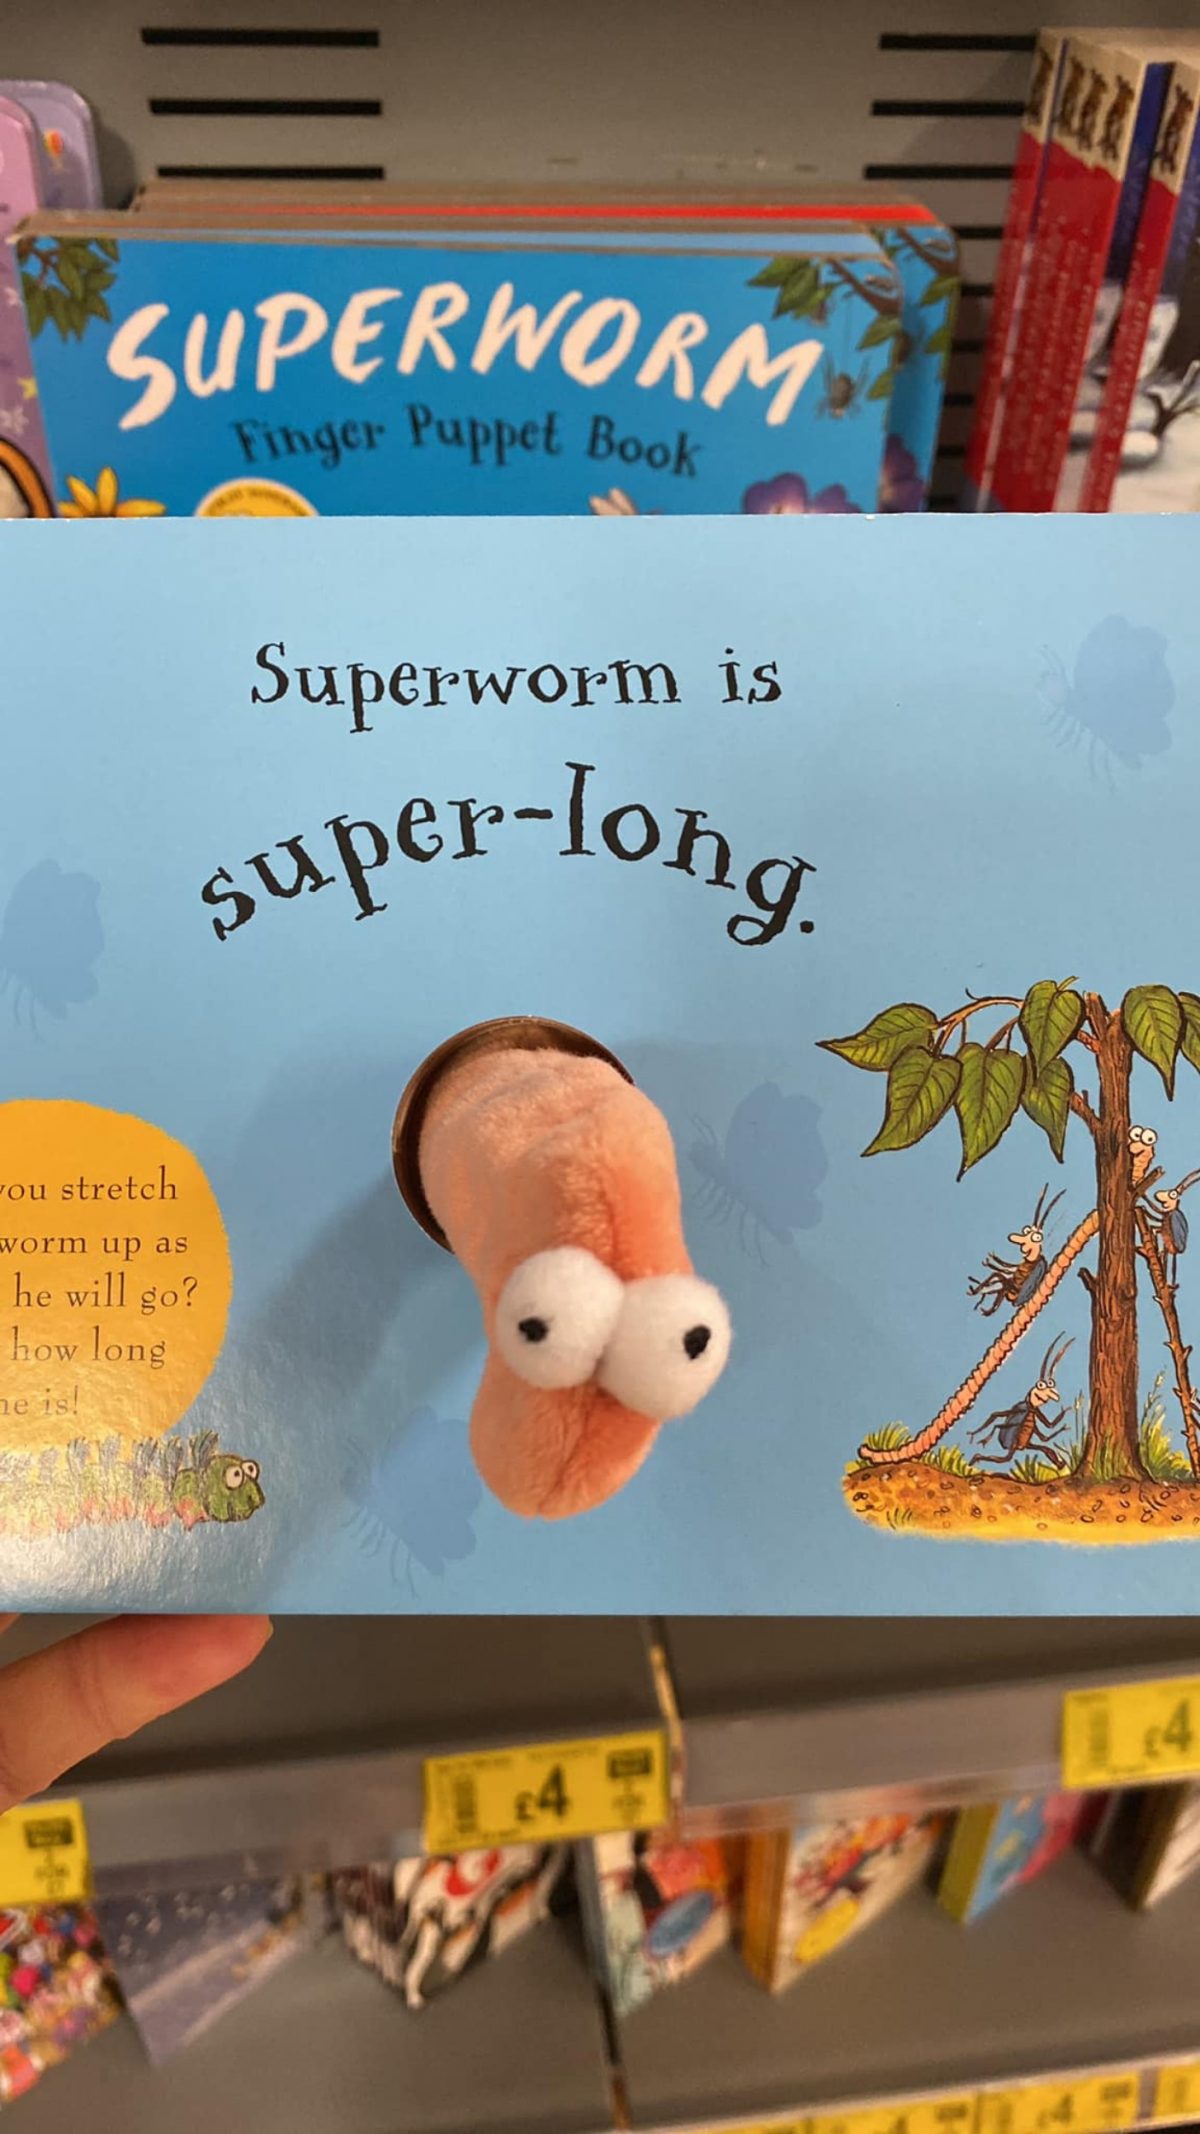 The funniest page says "The Superworm is super-long"